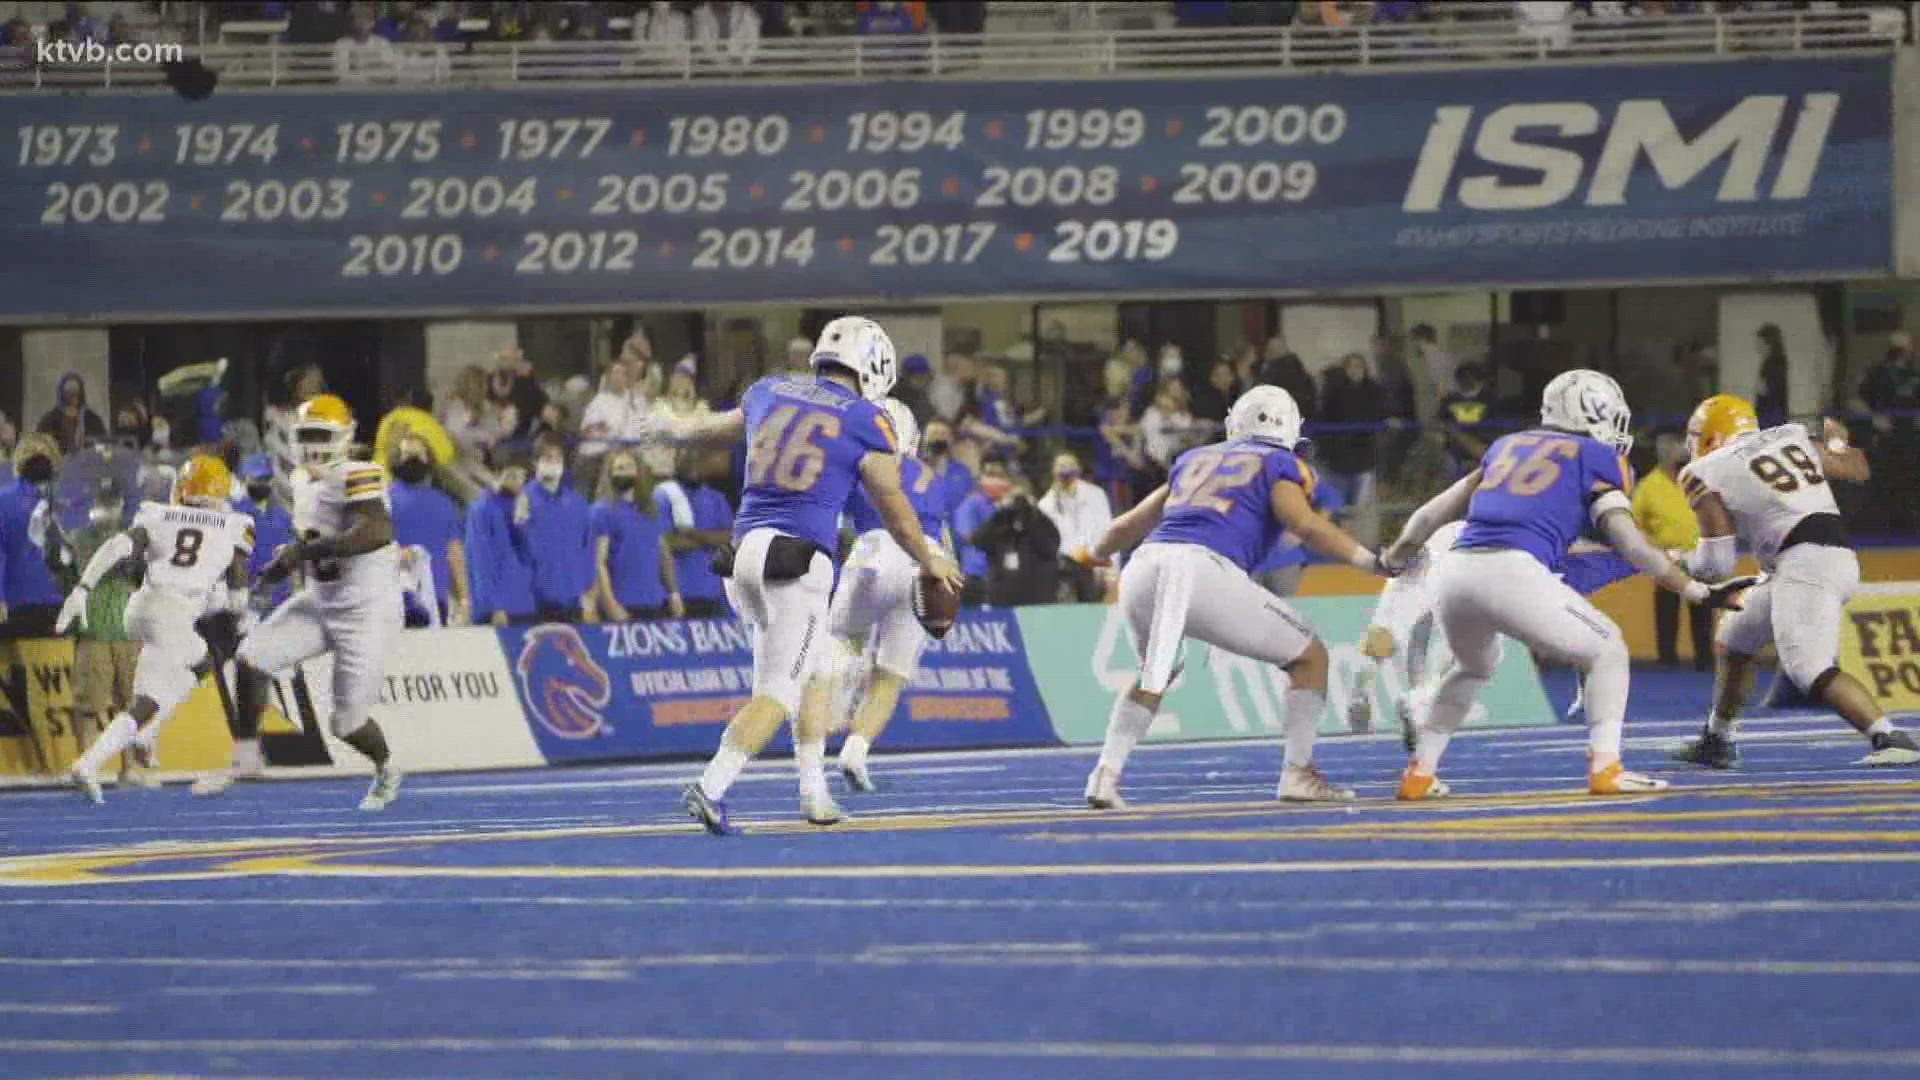 During his time with the Broncos, sixth-year Boise State punter Joel Valazquez has embraced some of what makes the Gem State so unique.